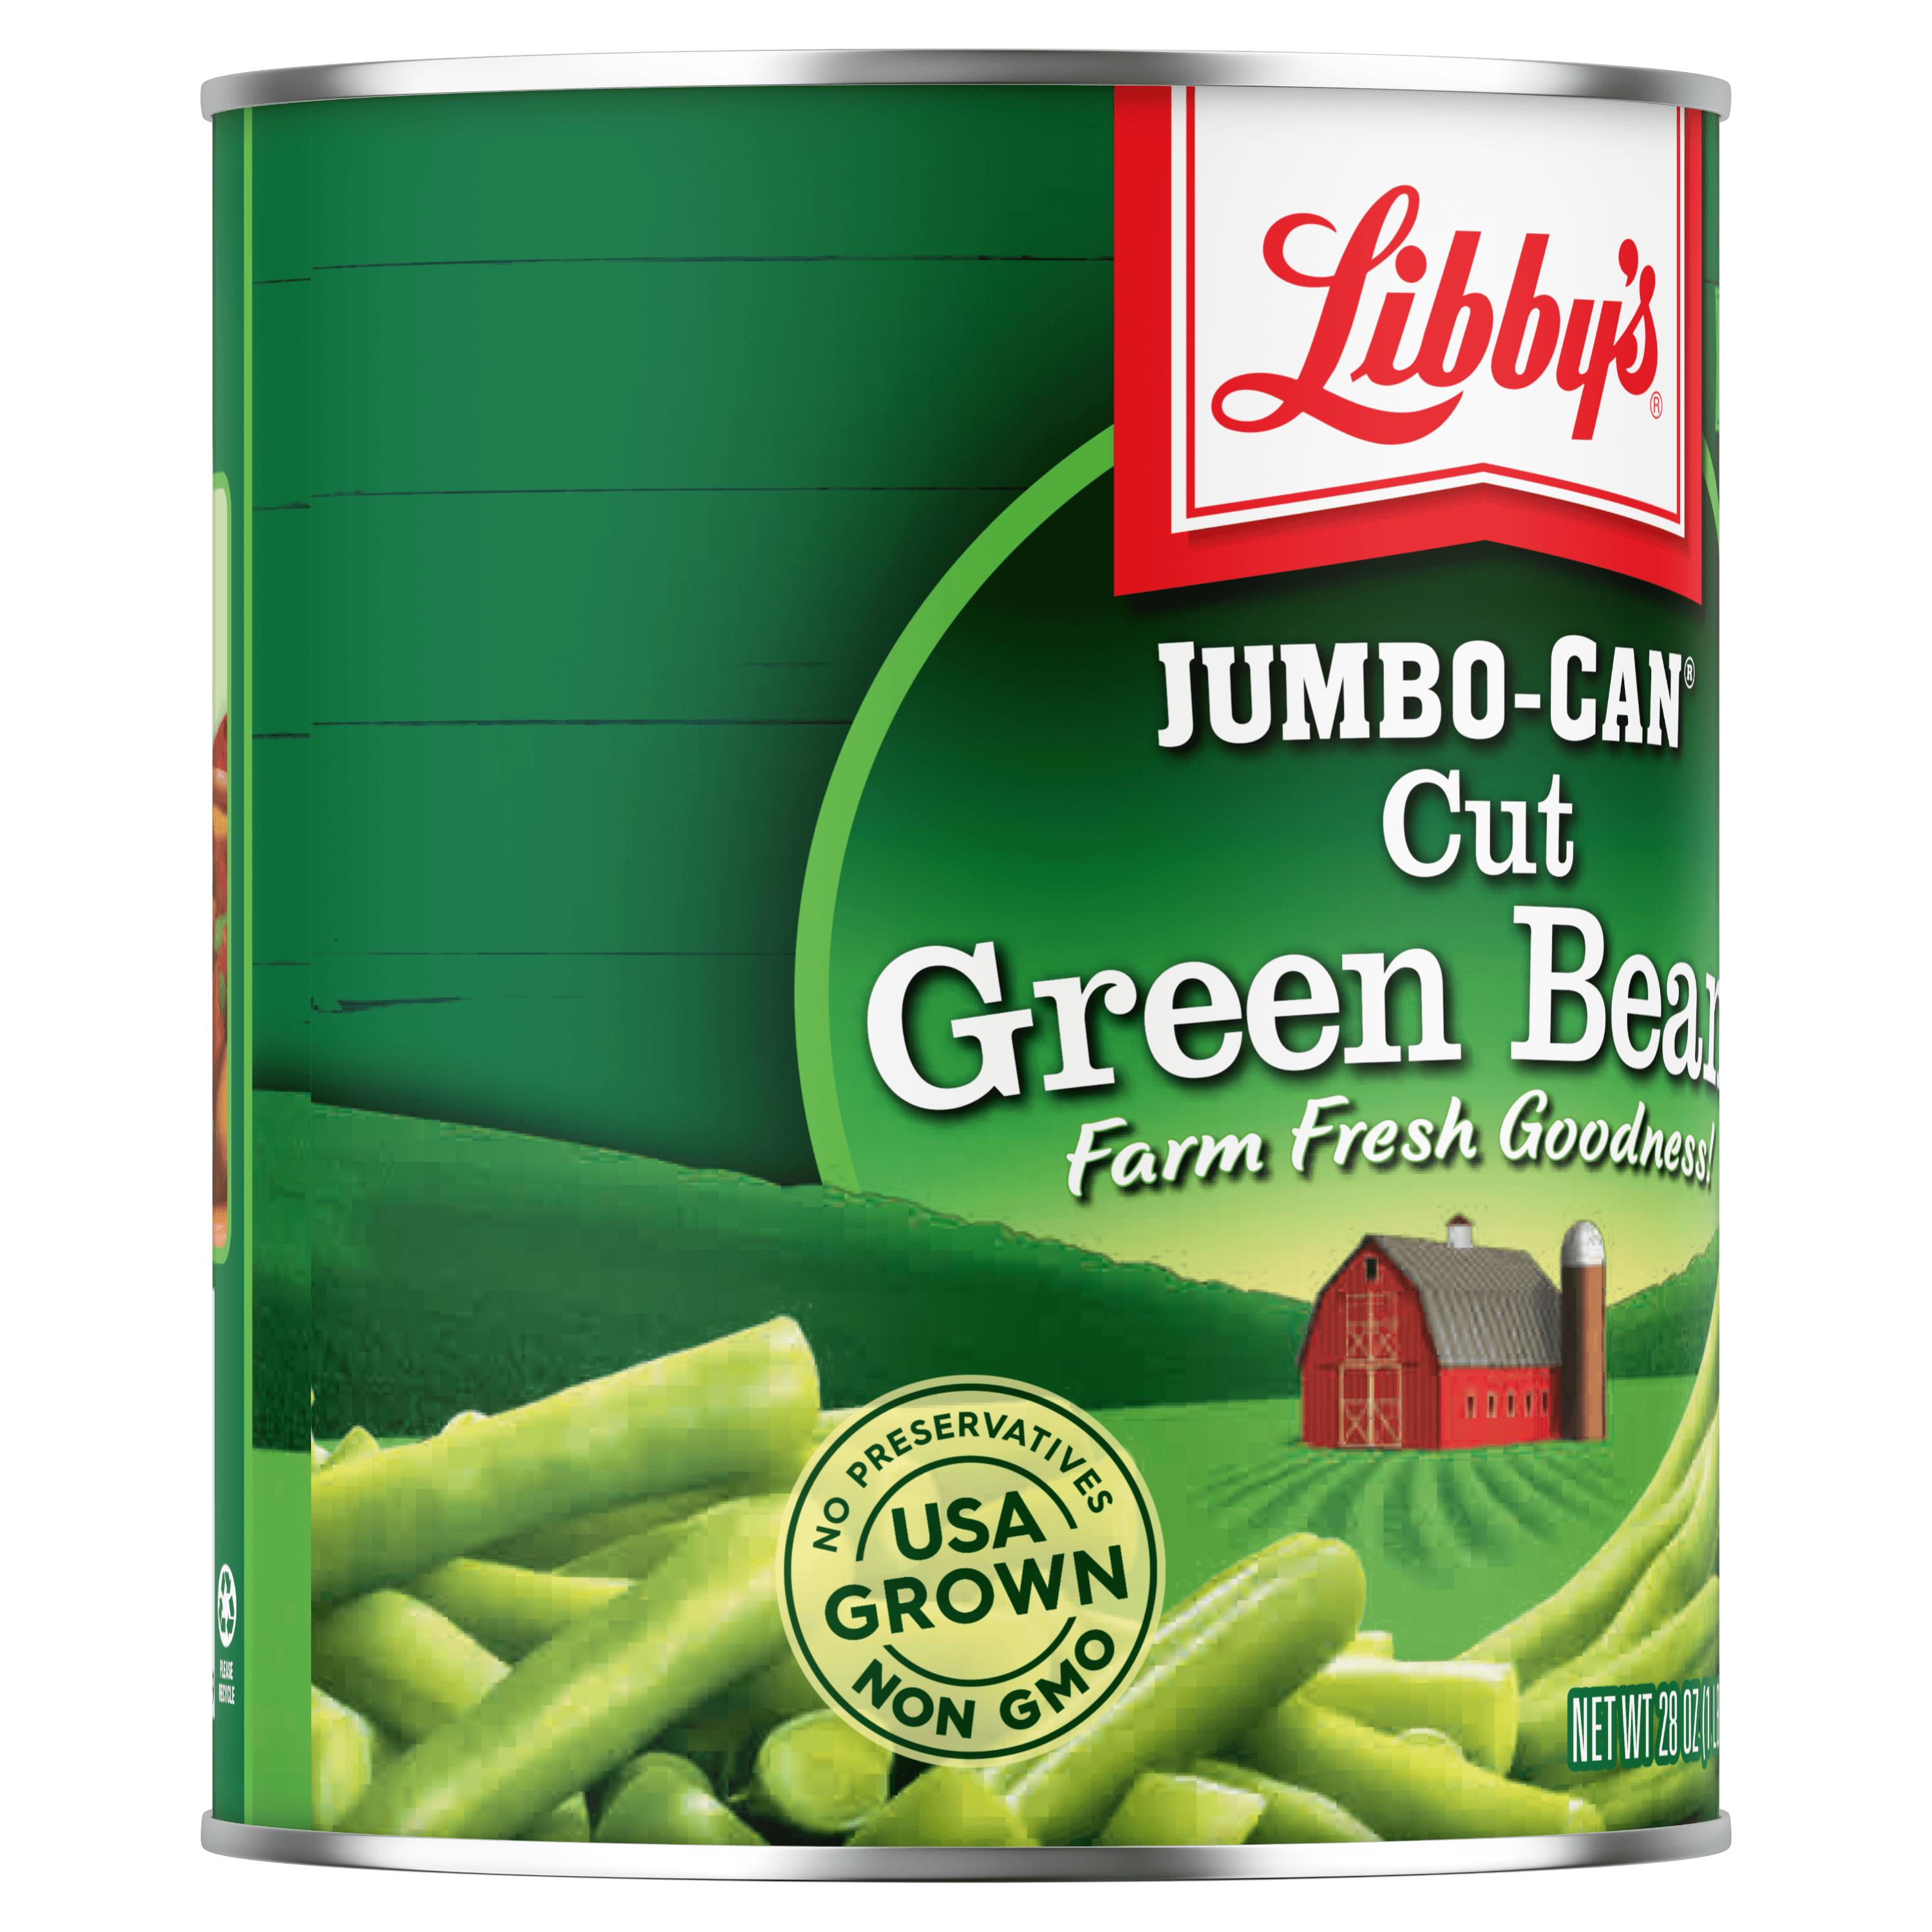 Libby's Cut Green Beans, 28 oz. Can, Canned Green Beans left panel of label showing USA Grown, No Preservatives and Non GMO information, Non-GMO